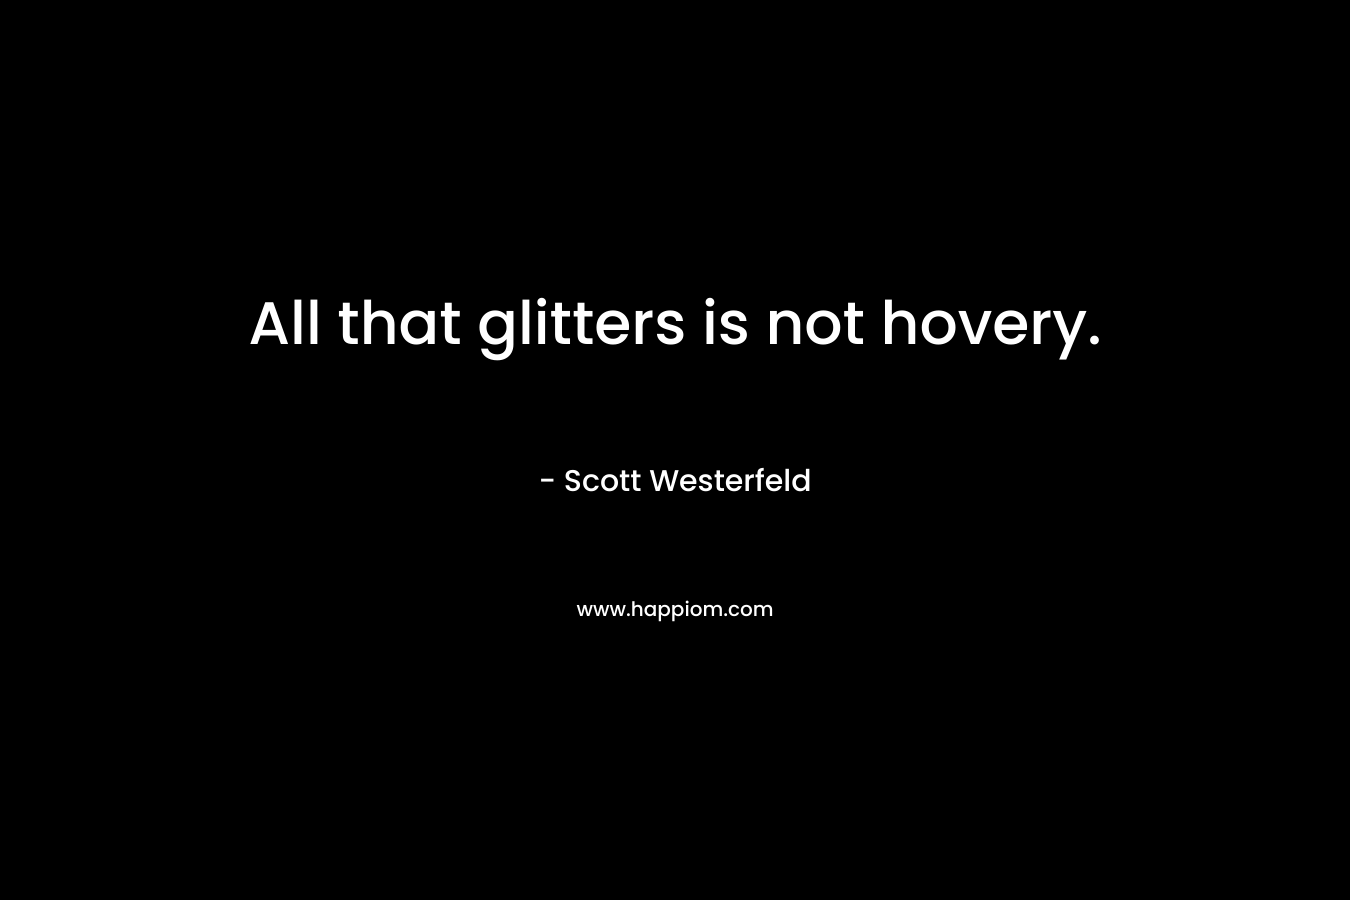 All that glitters is not hovery.